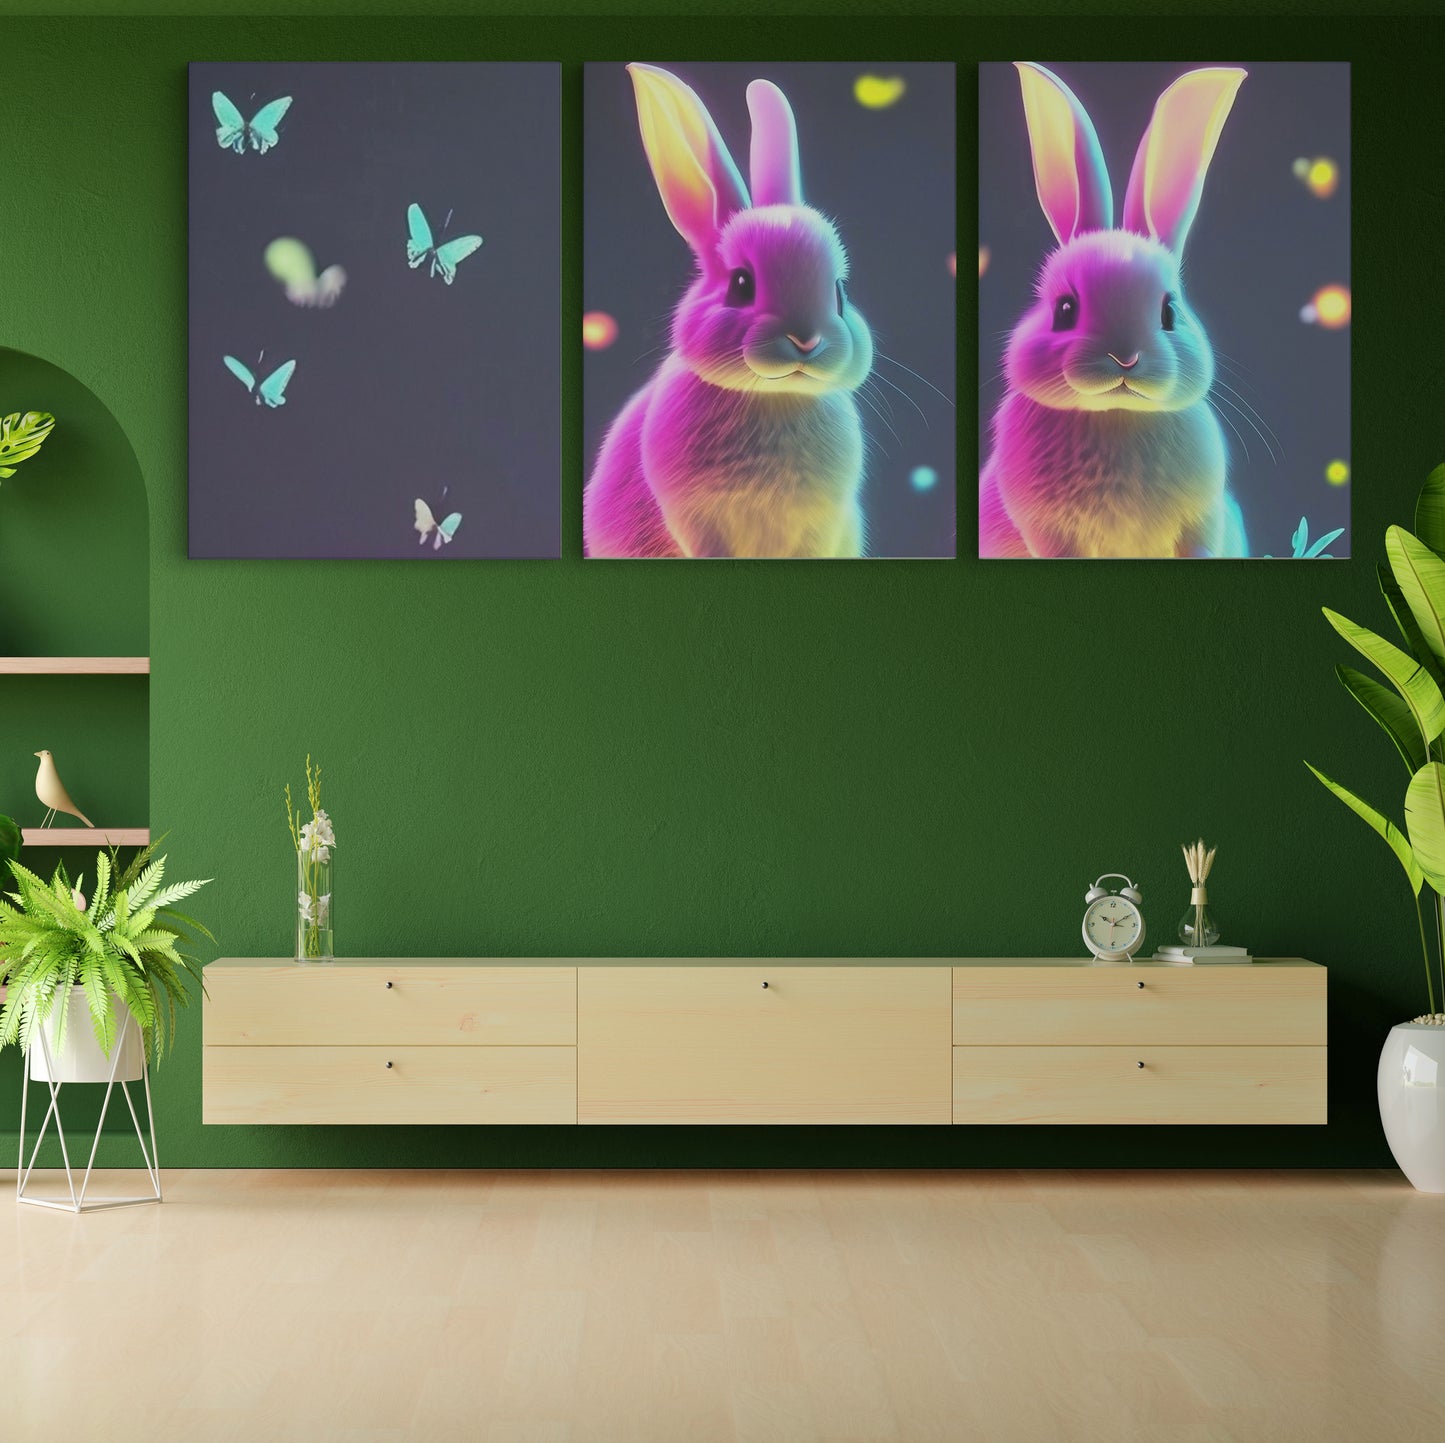 Luminous Playfulness: Neon Glowing Rabbits - Captivating Wall Art Celebrating the Whimsical Charm and Radiant Glow of Playful Bunnies - S06E17